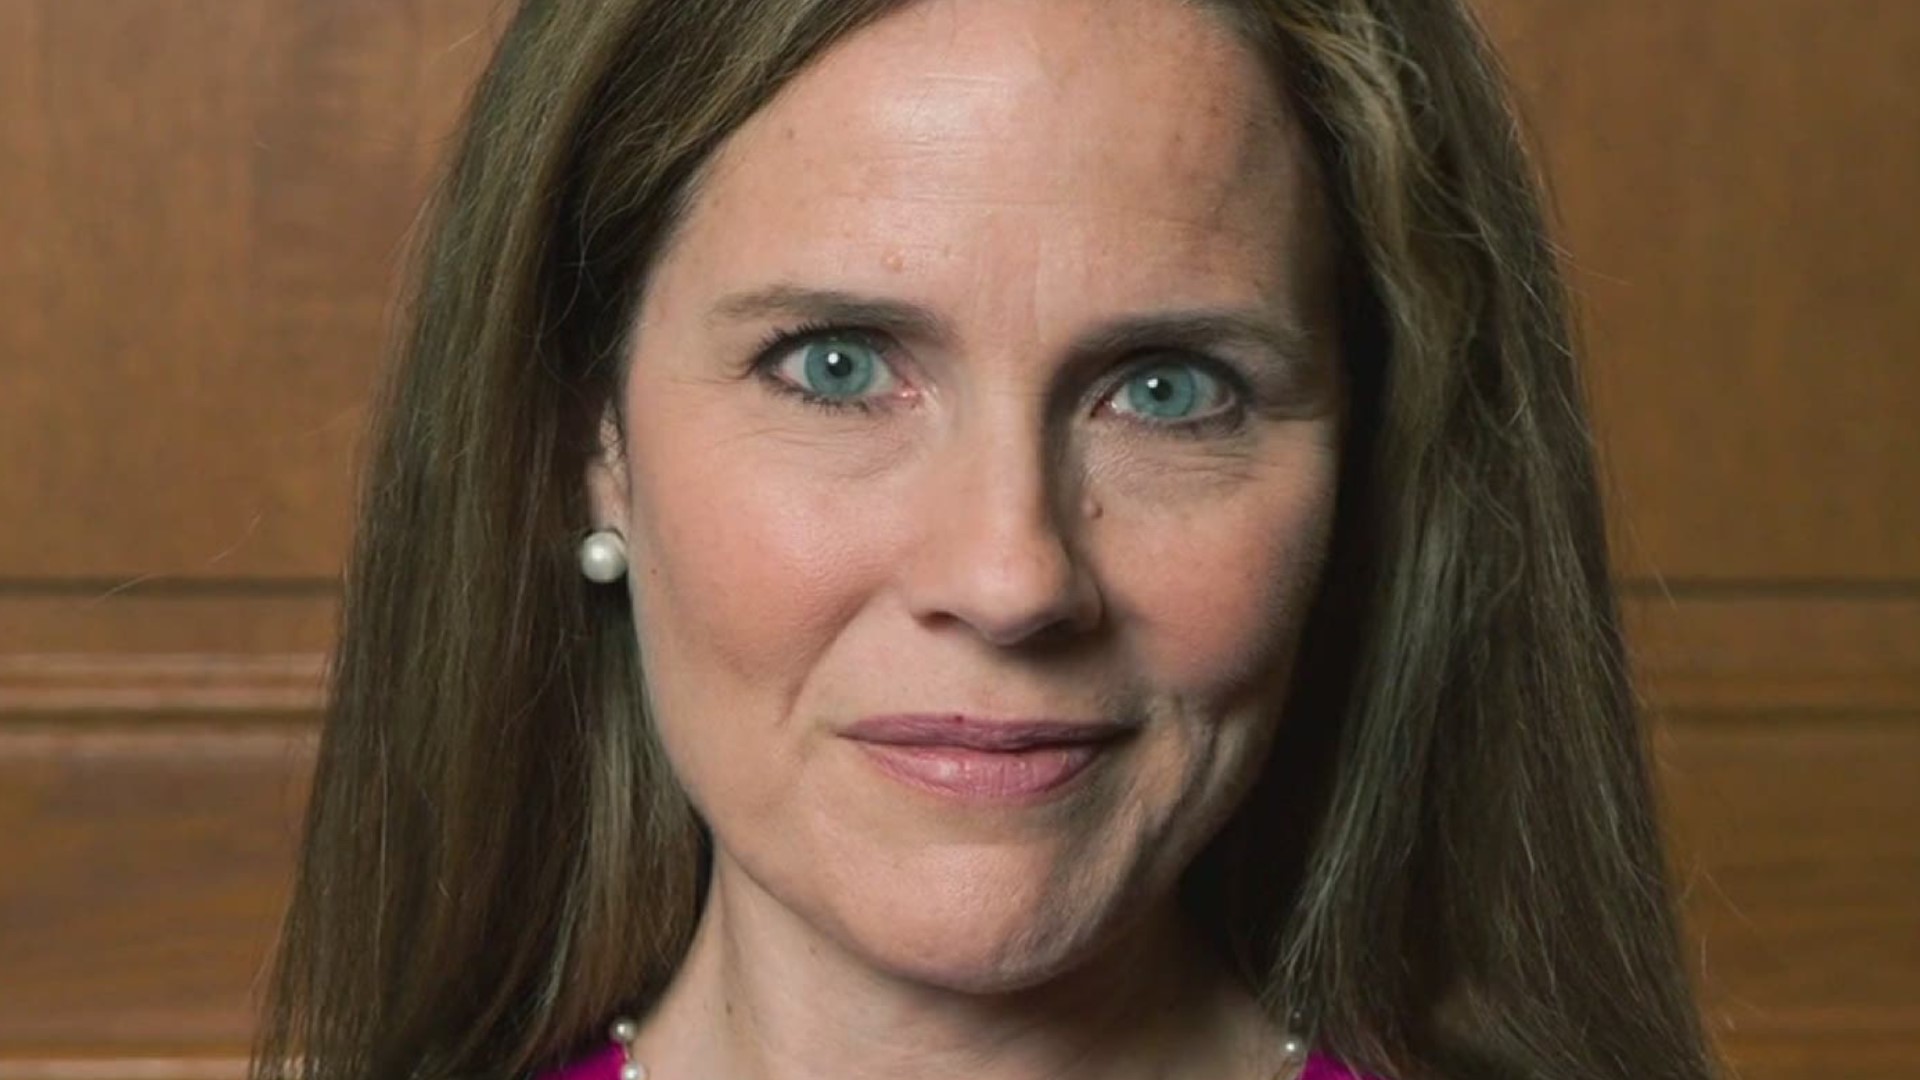 On Saturday President Donald Trump nominated Judge Amy Coney Barrett to replace Ruth Bader Ginsburg on the Supreme Court.